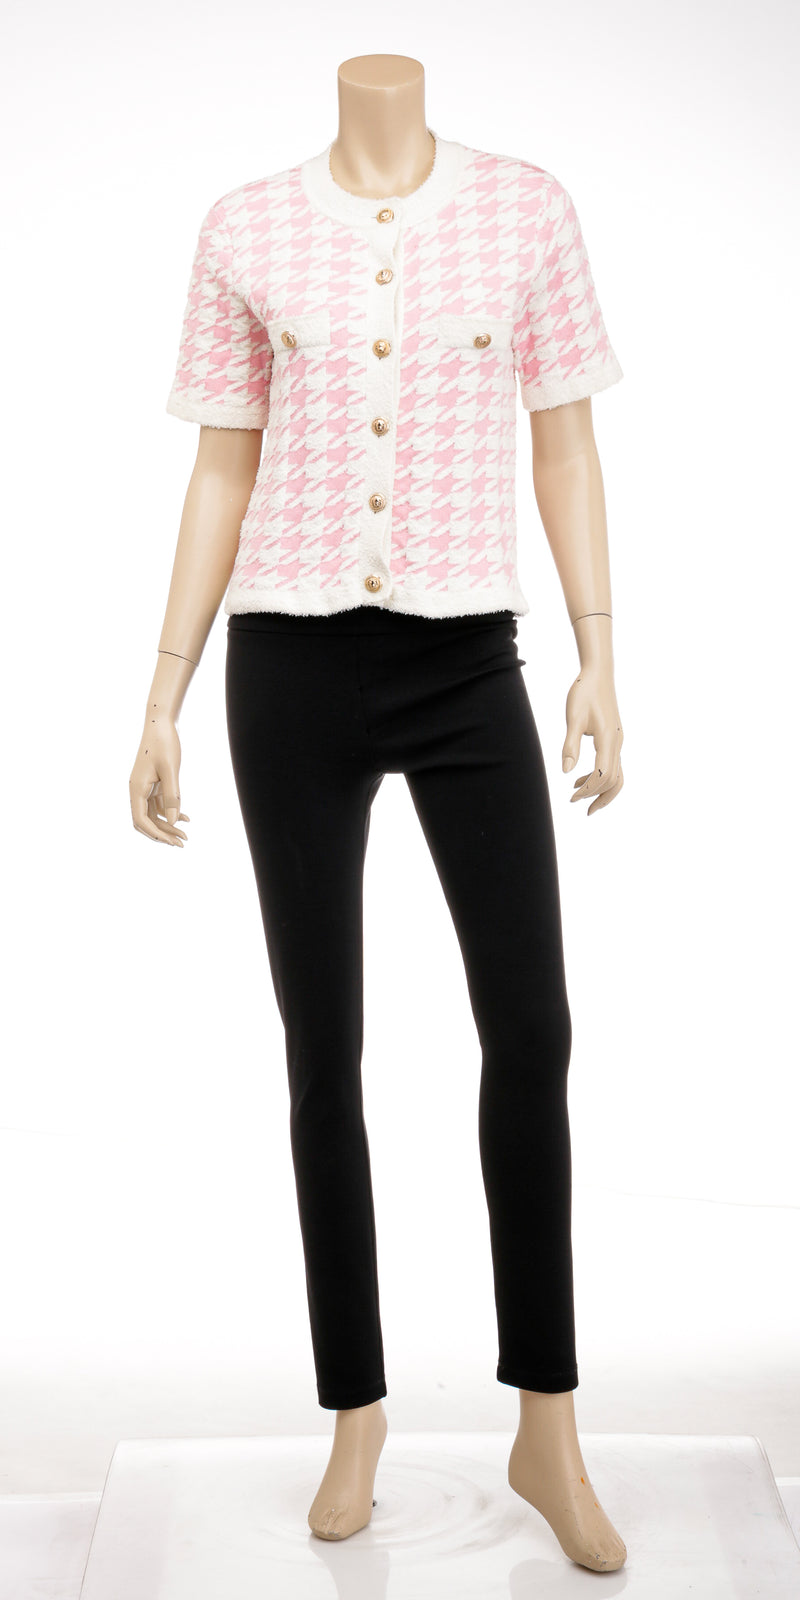 Balmain Pink and White Houndstooth Terry Jacquard Cardigan Size S